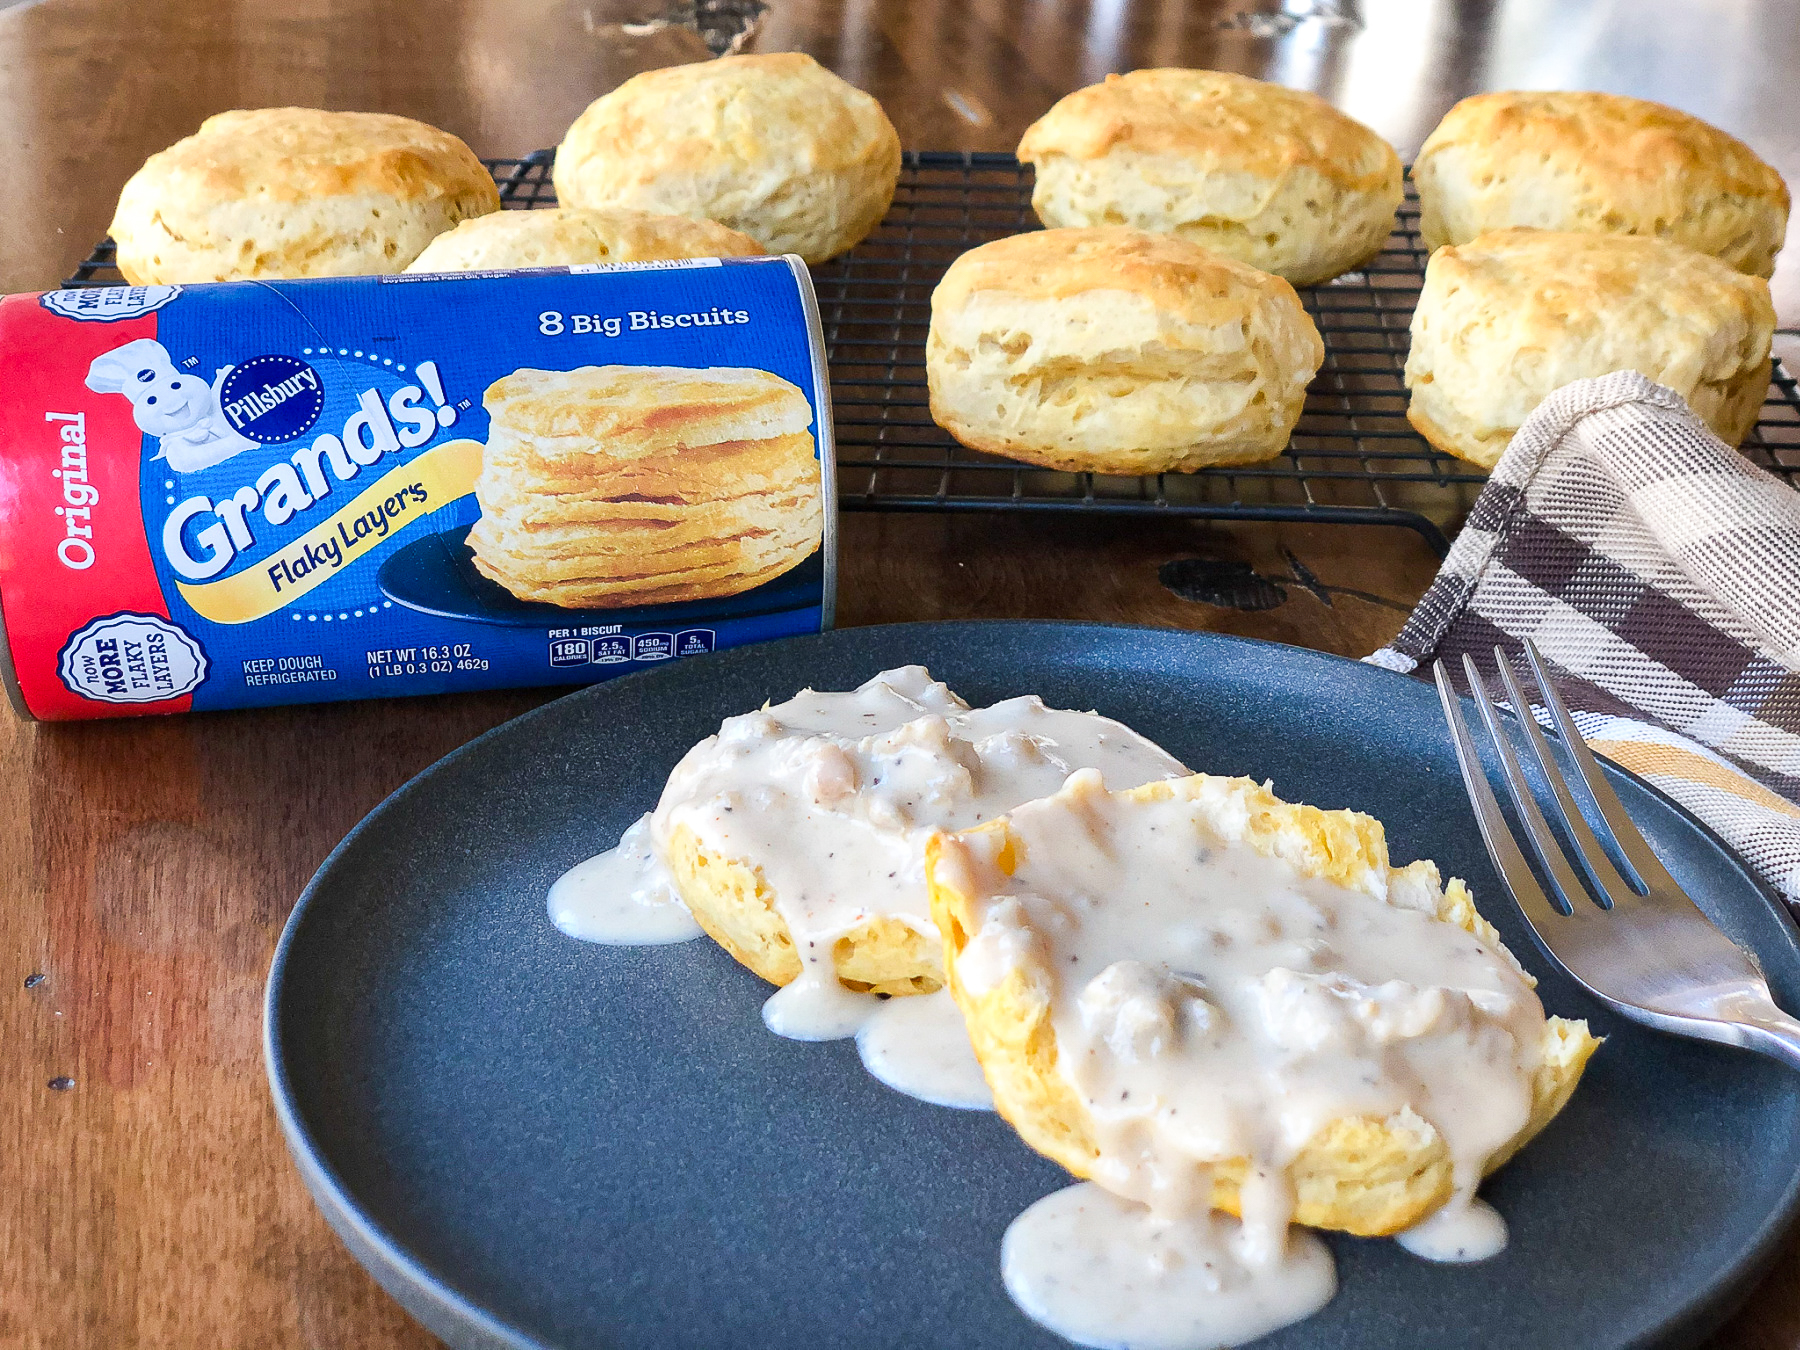 Pick Up Pillsbury Refrigerated Baked Goods For As Low As $1.53 At Kroger